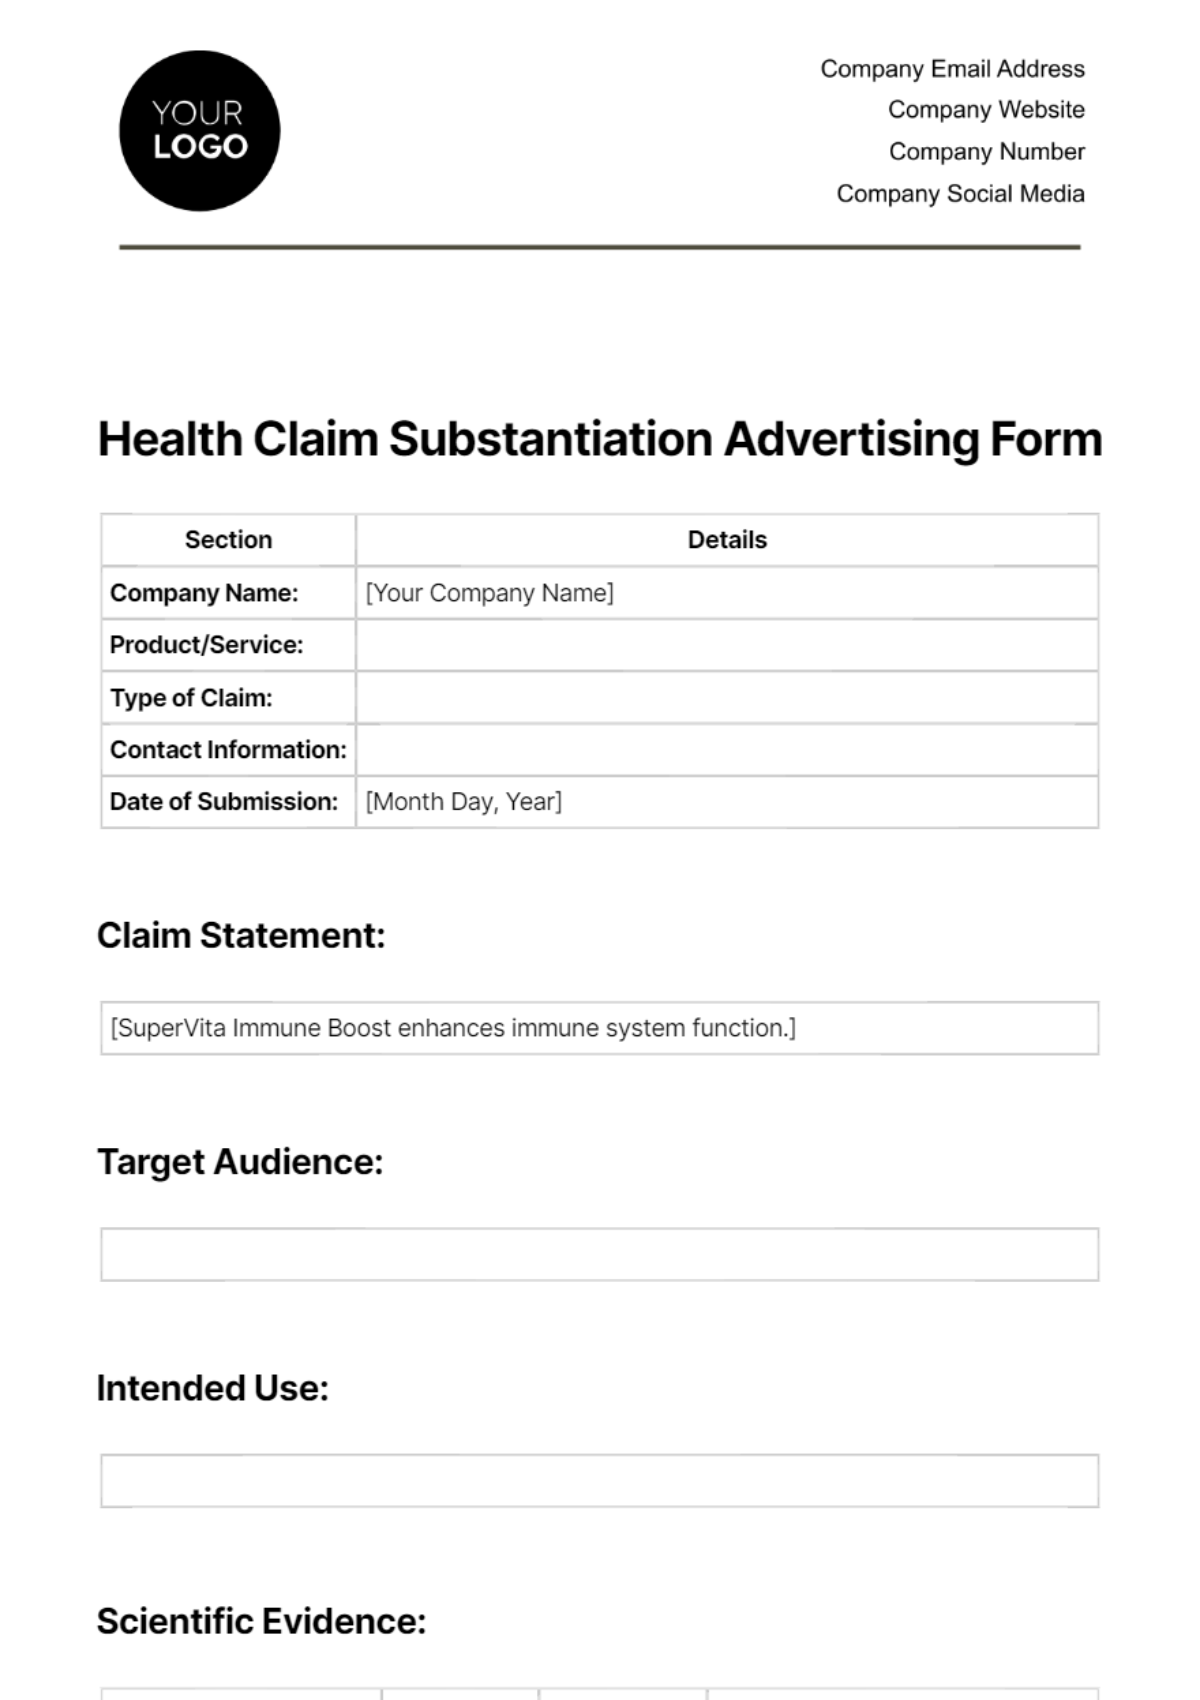 Health Claim Substantiation Advertising Form Template